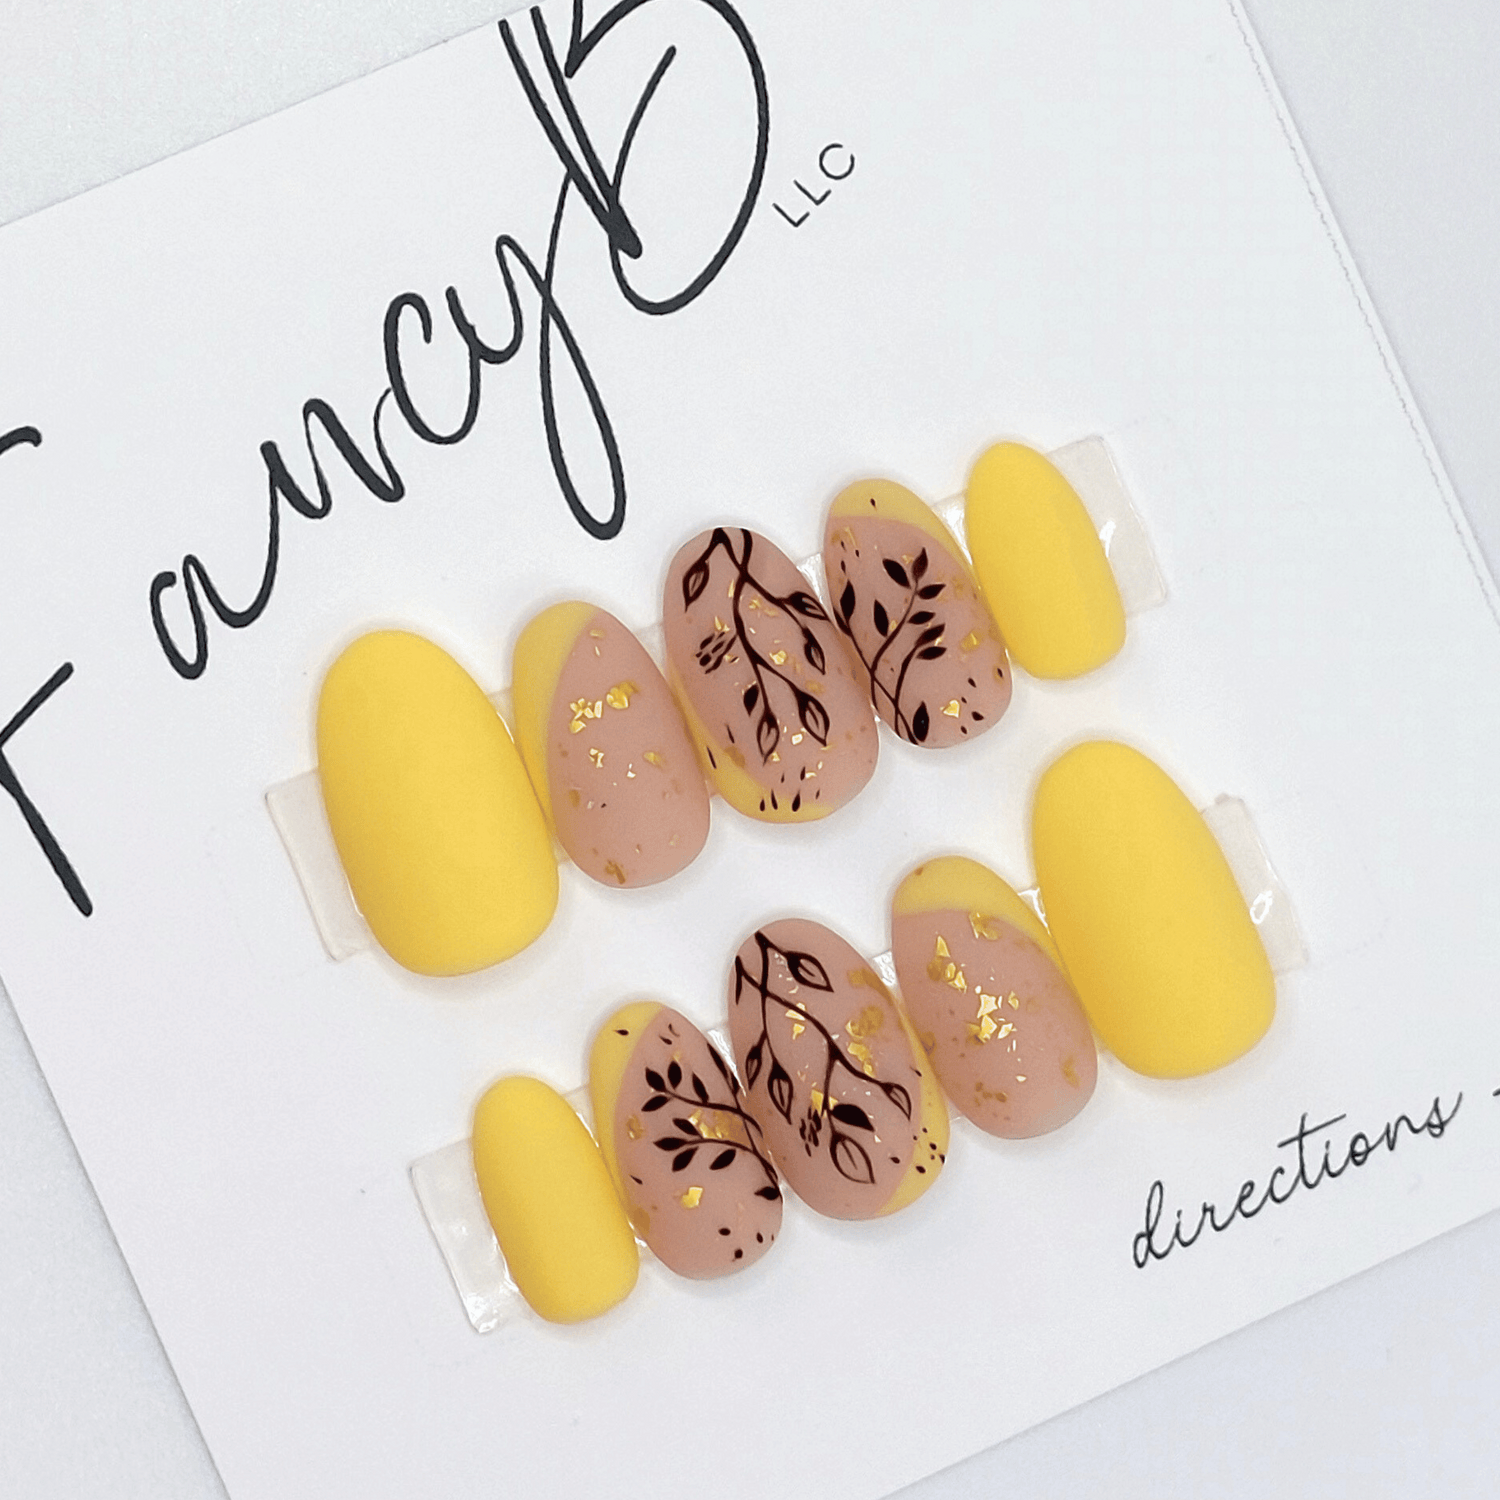 custom flower nails, floral press on nails with hand painted leaves with light soft yellow accents and gold flakes with matte finish on short oval nails.